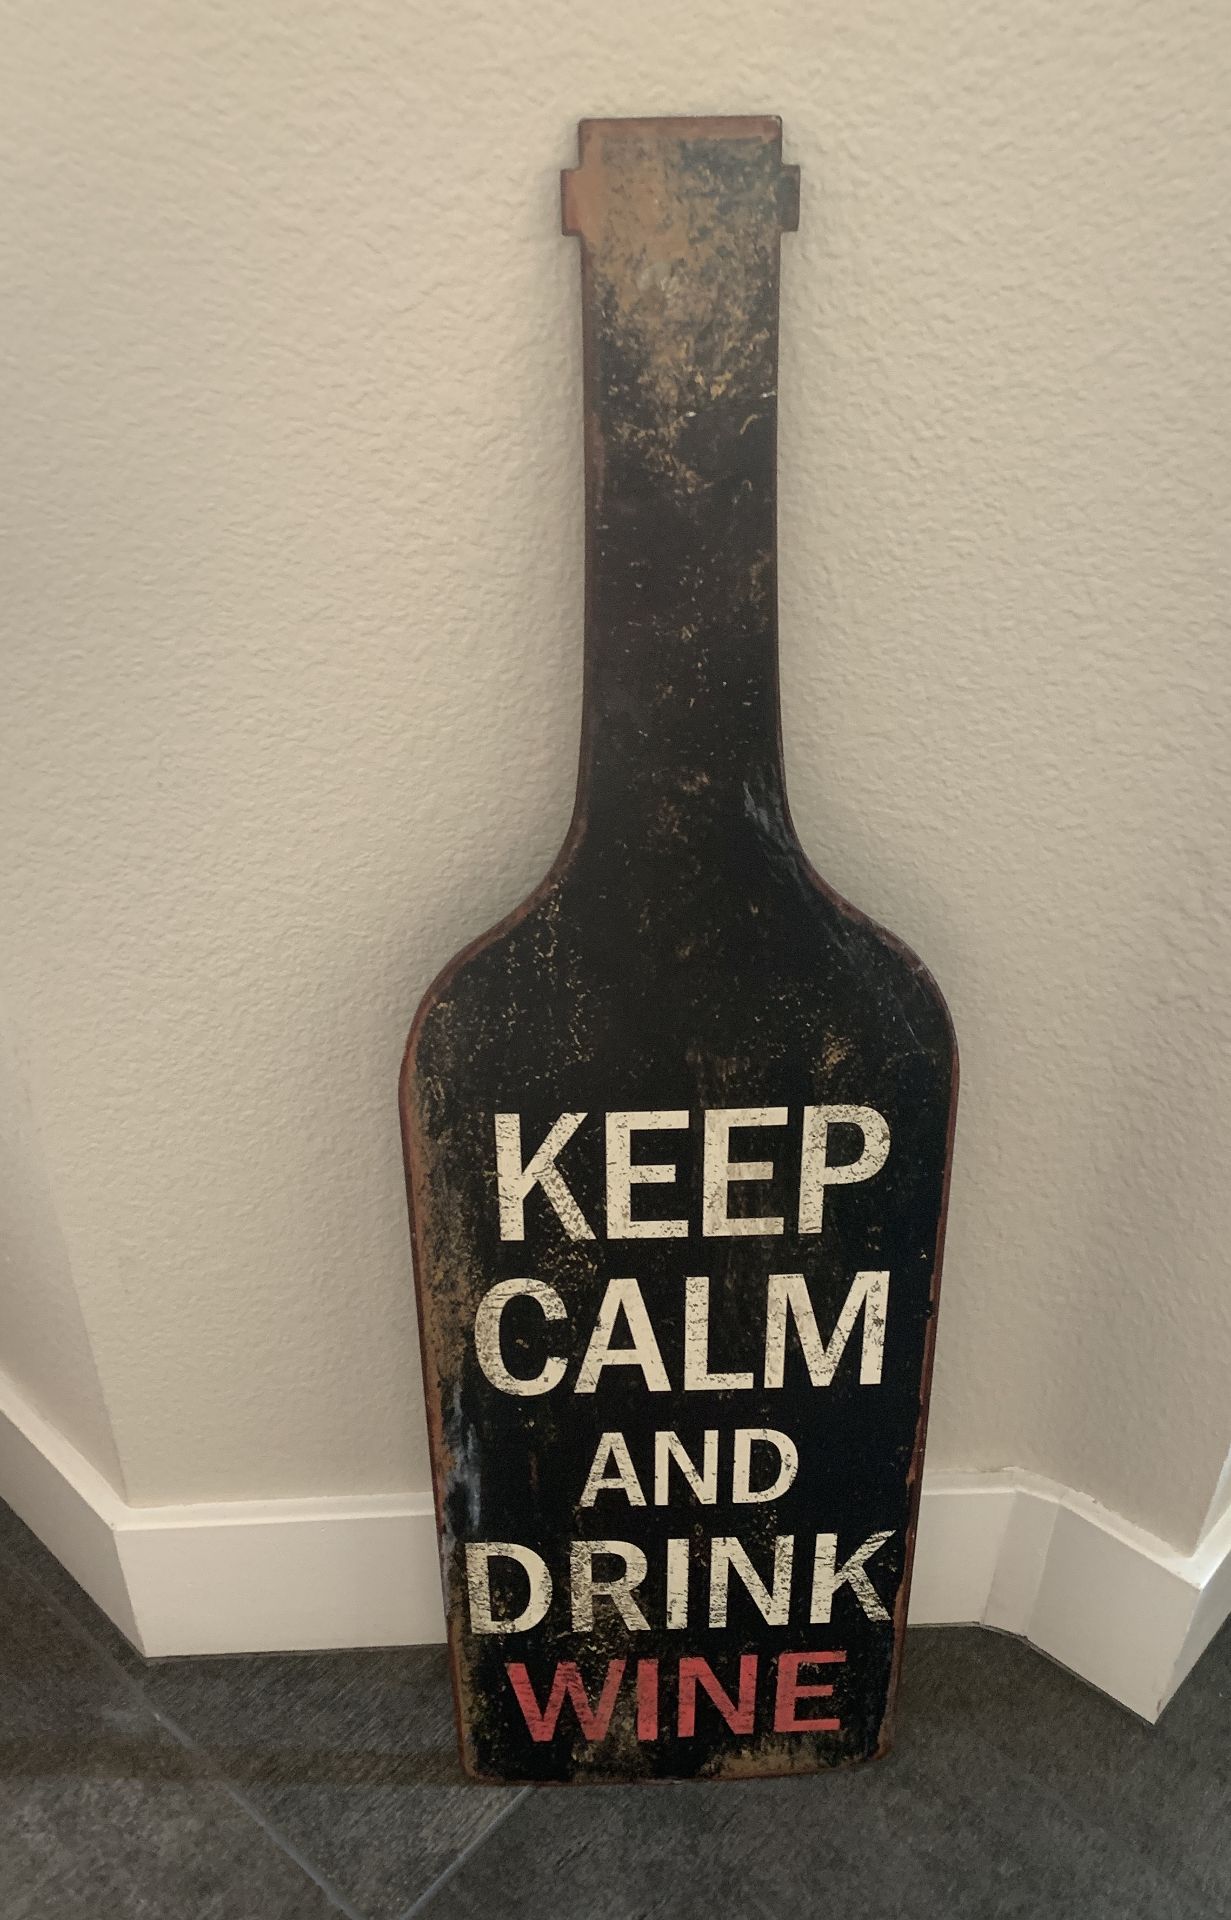 KEEP. CALM AND DRINK WINE LARGE METAL HANGING DECO SIGN